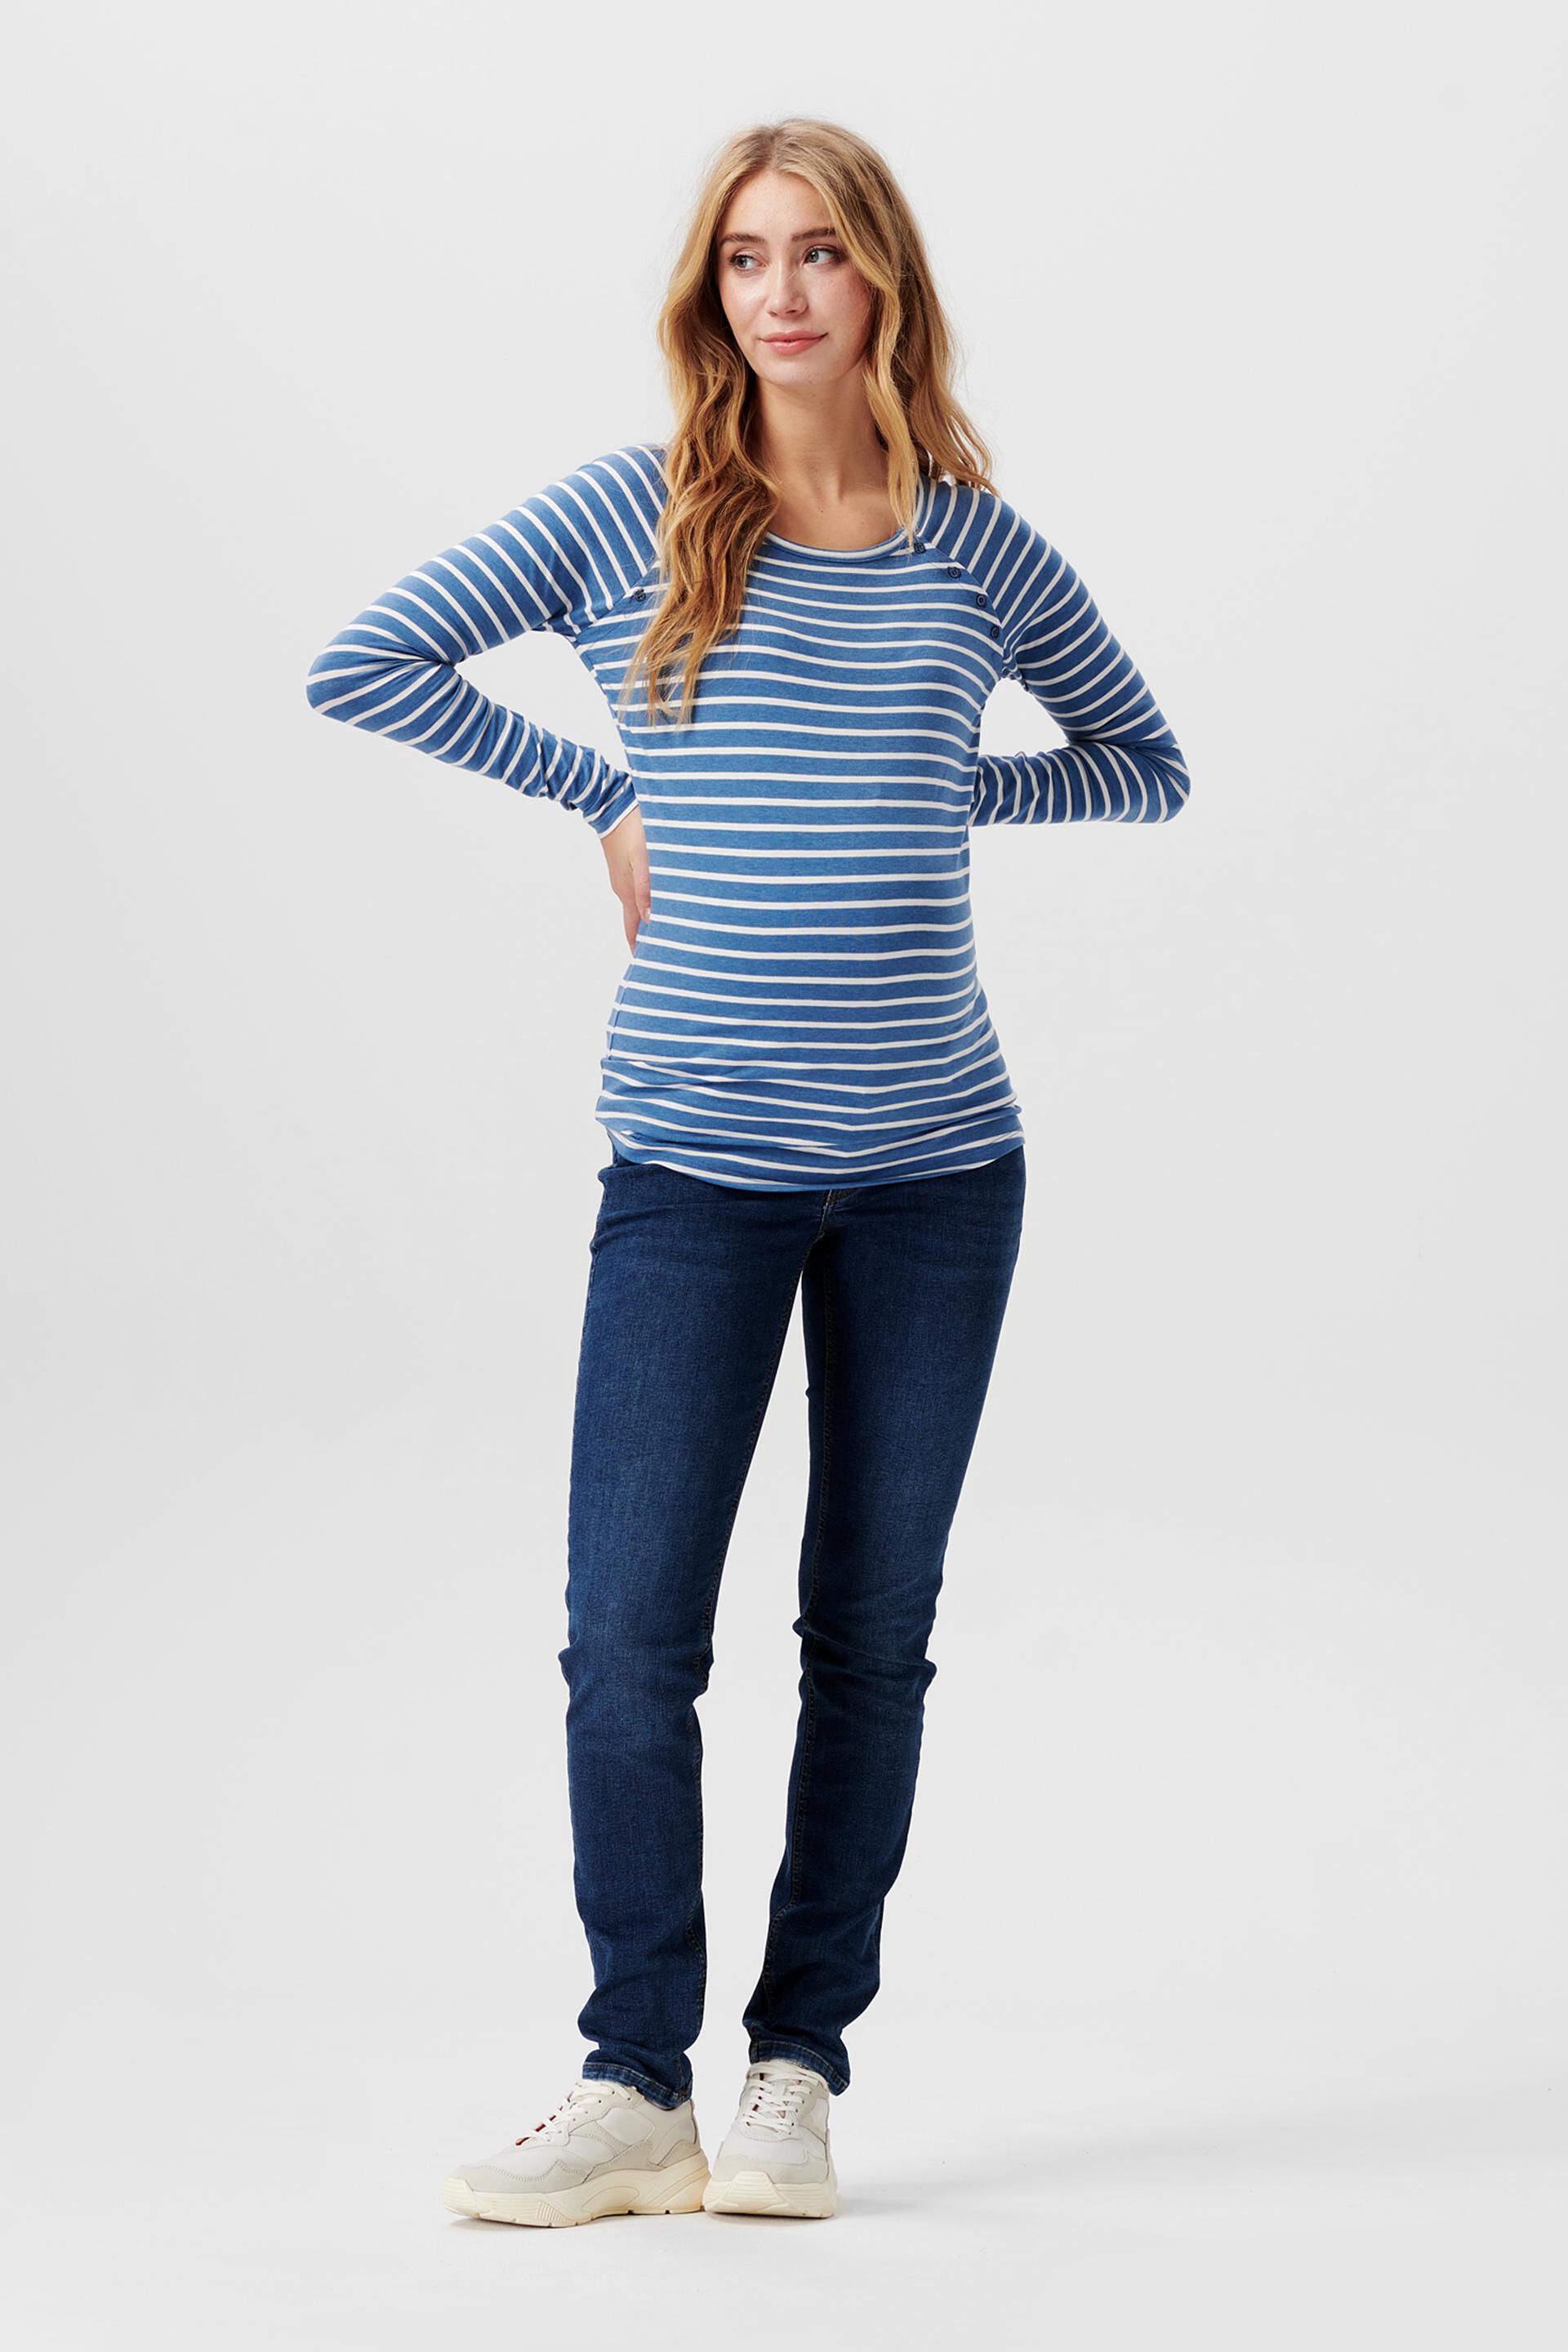 Esprit Striped top, organic cotton long-sleeved